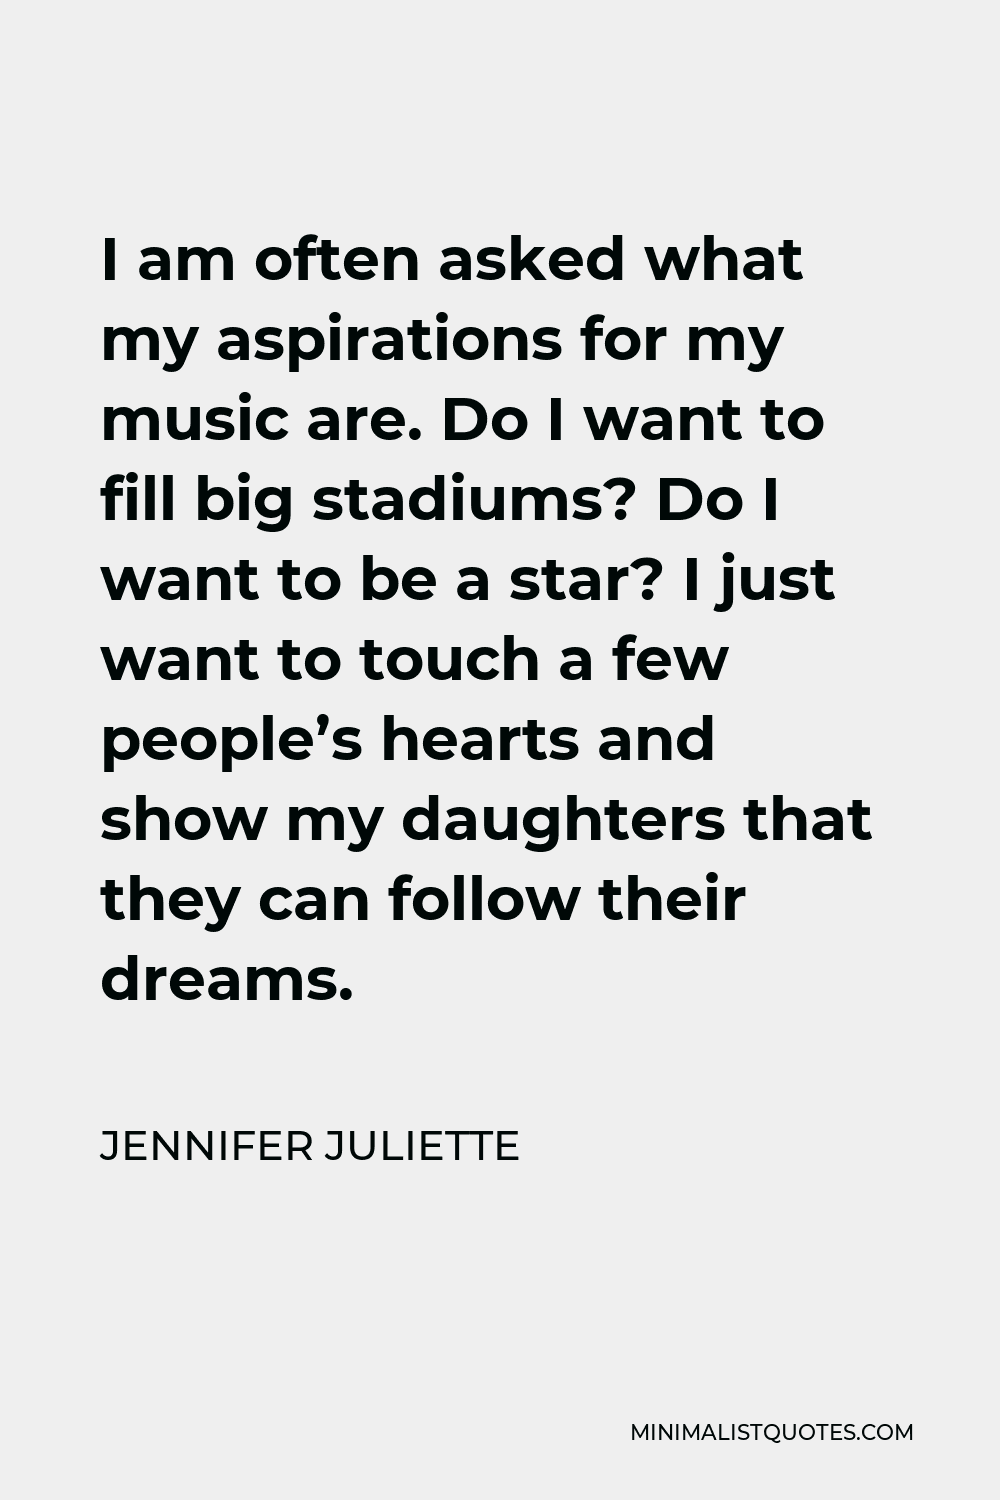 Jennifer Juliette Quote - I am often asked what my aspirations for my music are. Do I want to fill big stadiums? Do I want to be a star? I just want to touch a few people’s hearts and show my daughters that they can follow their dreams.